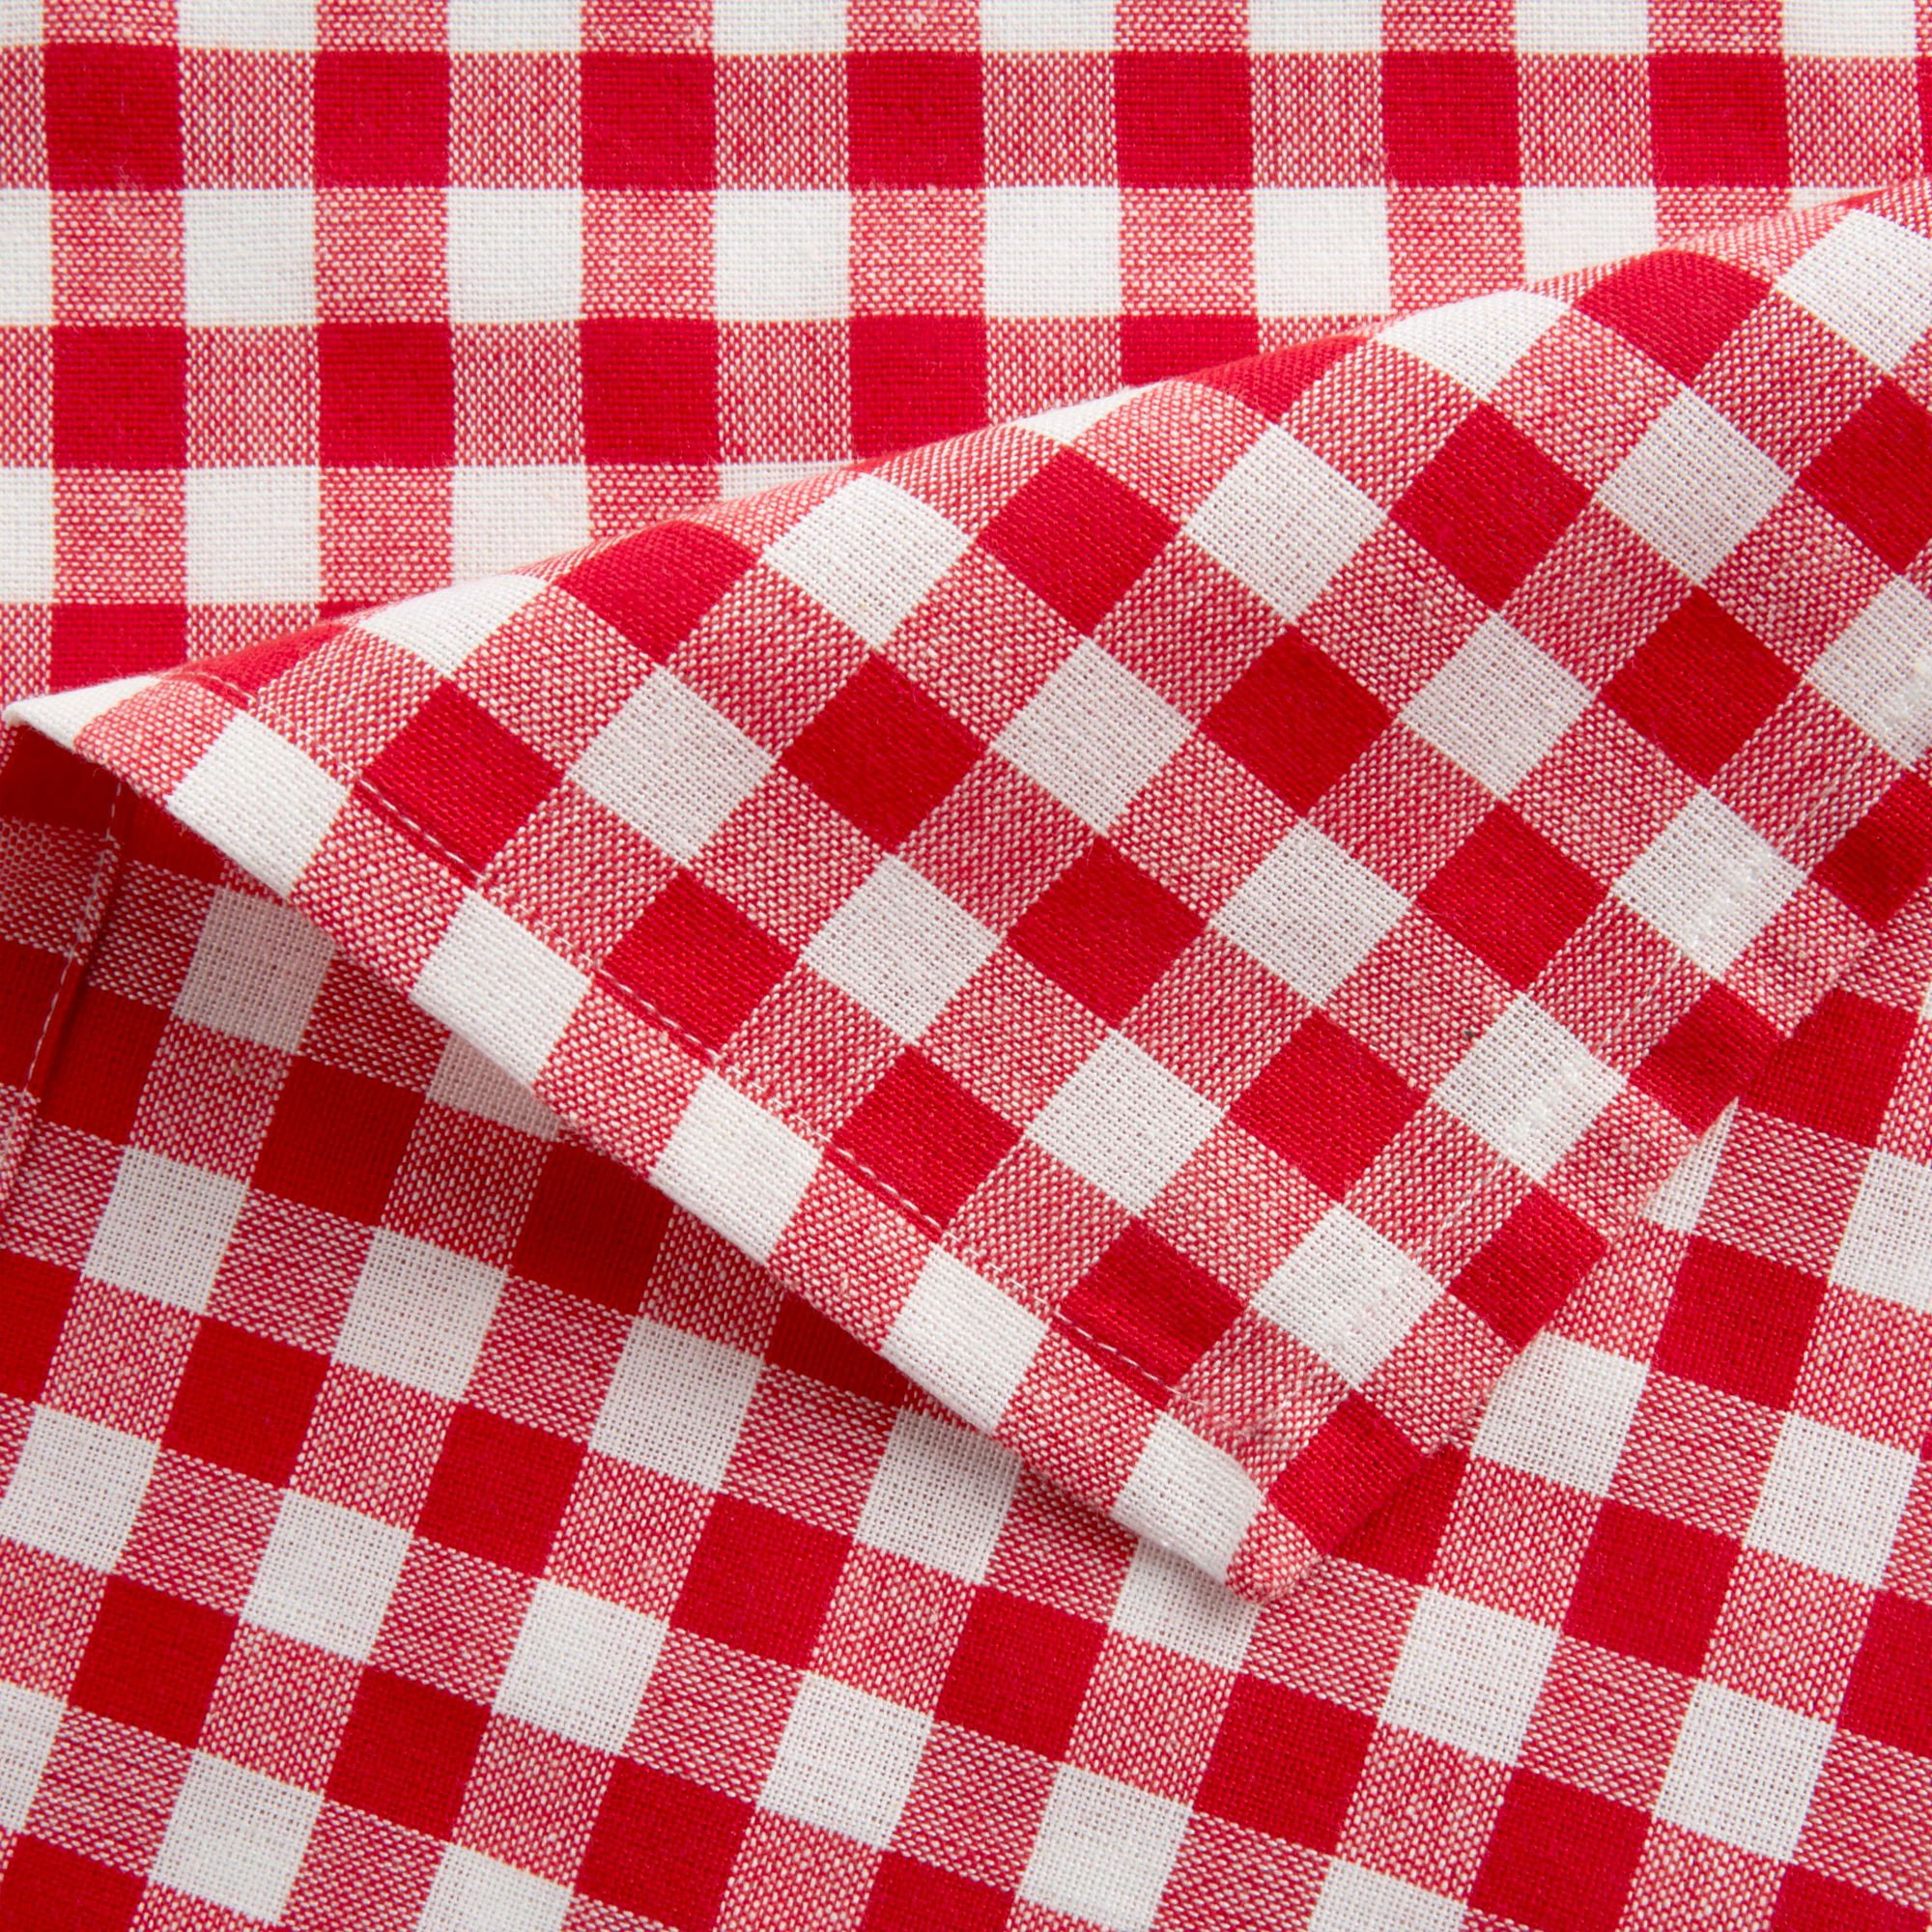 Servitex Flash-Dri Red And Black Gingham Checks Cotton In Packaging - Ruby  Lane